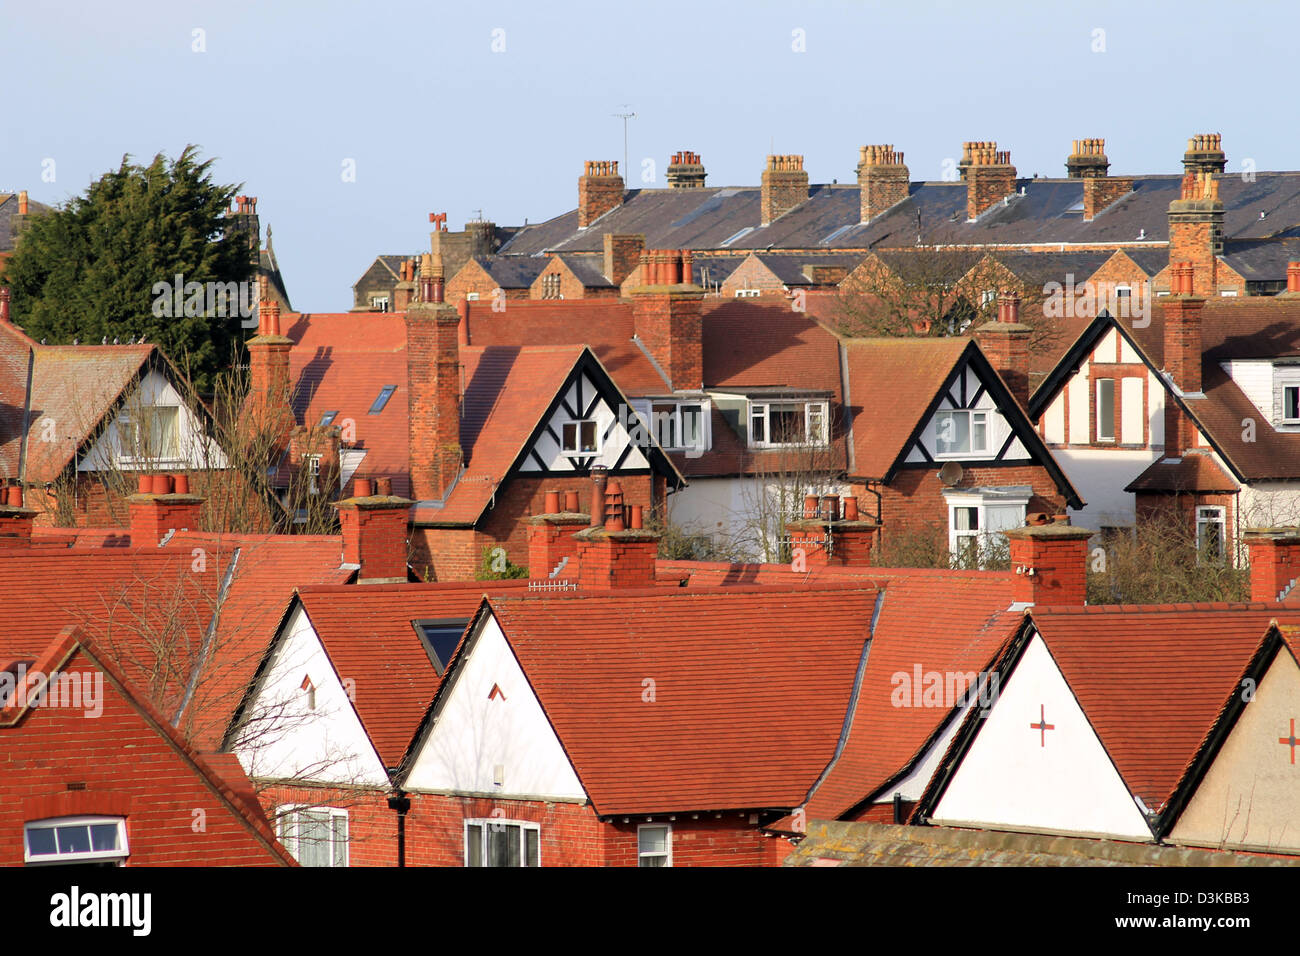 Rooftops of houses and homes in English Town, Scarborough, England. Stock Photo